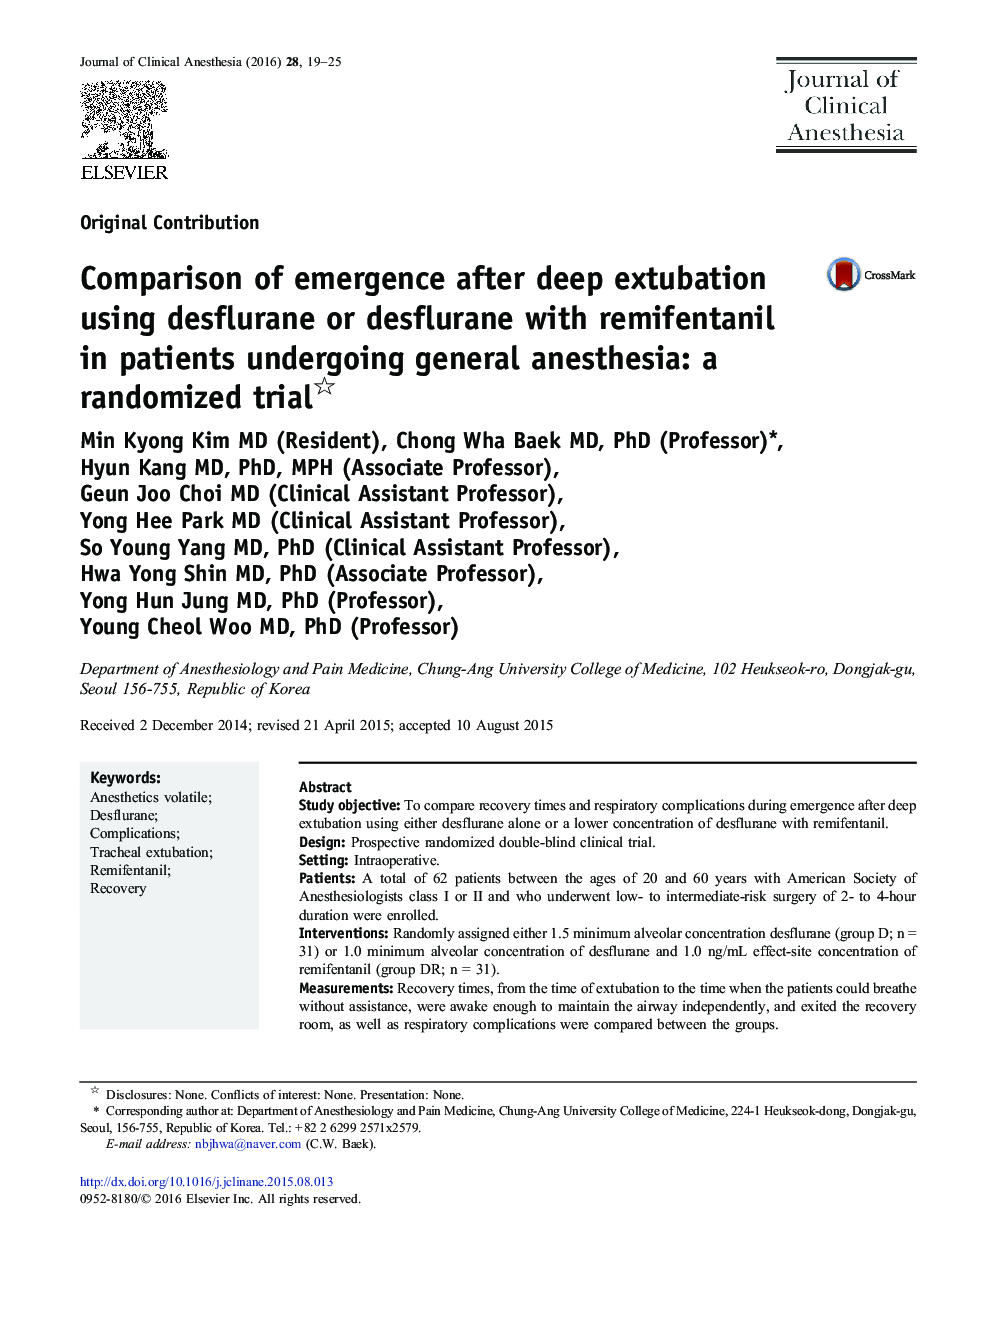 Comparison of emergence after deep extubation using desflurane or desflurane with remifentanil in patients undergoing general anesthesia: a randomized trial 